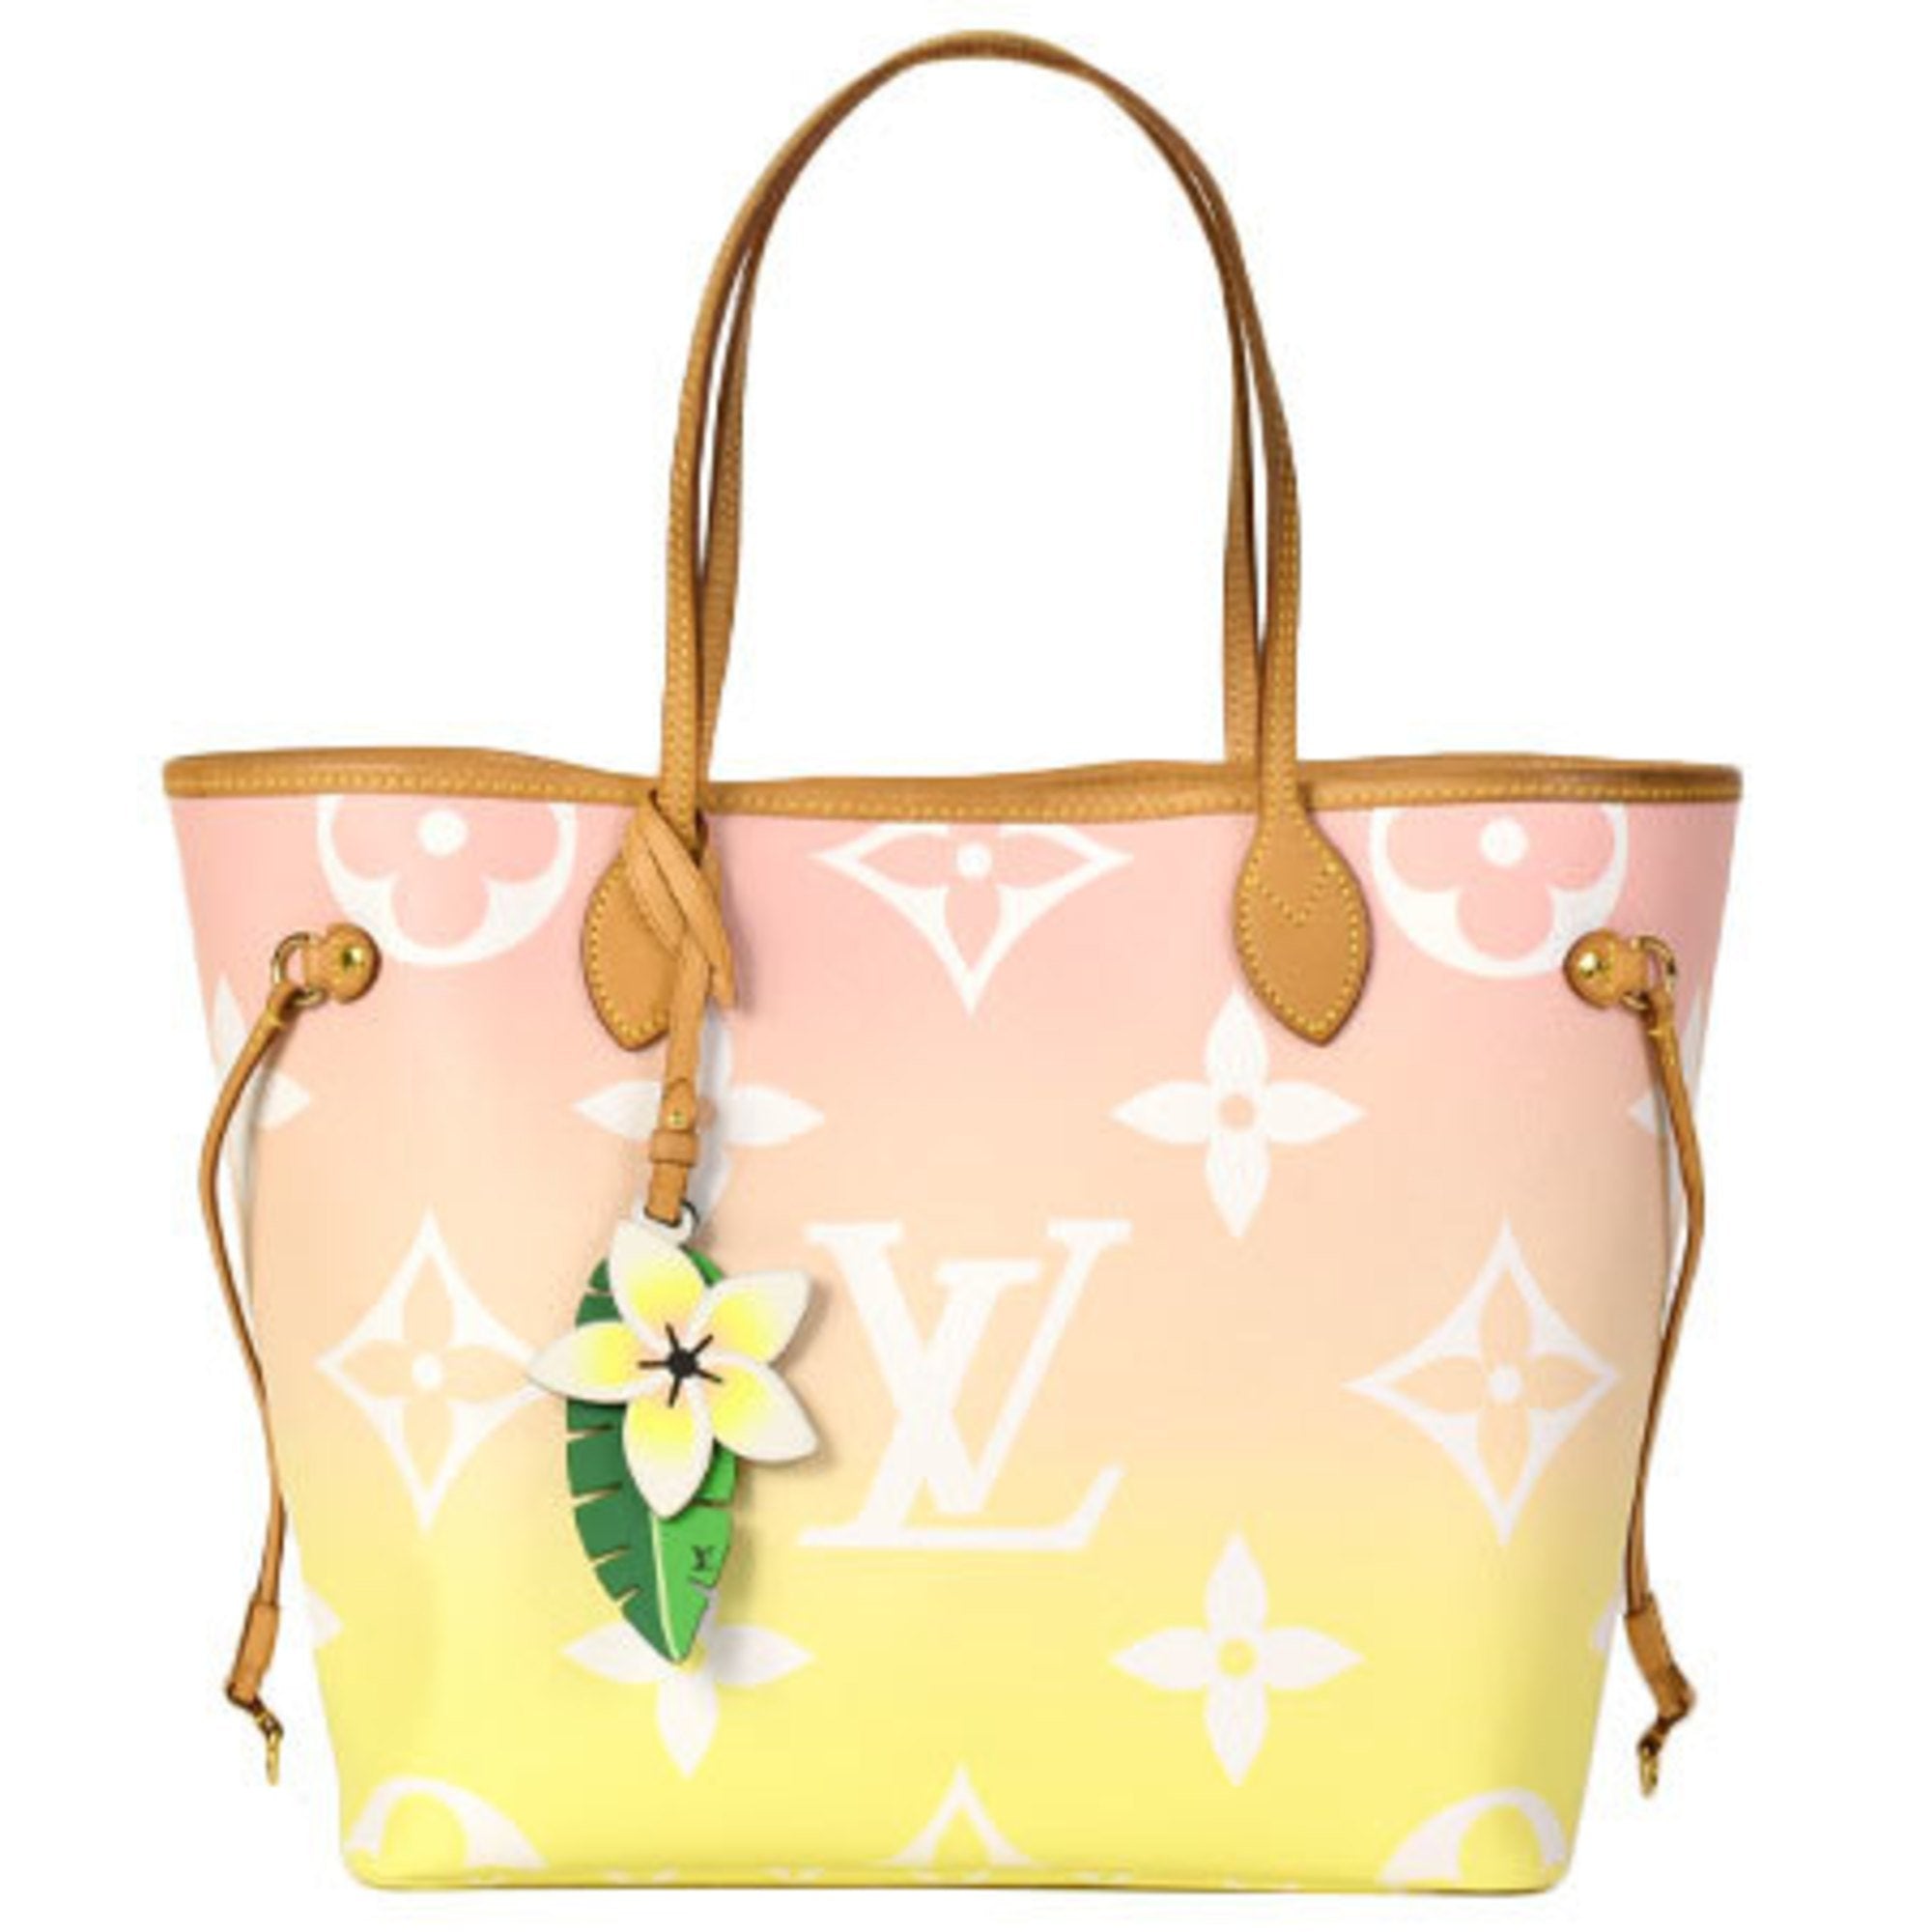 LOUIS VUITTON Neverfull MM Tote Bag Pouch BY THE POOL Pink M45680 Auth LV  New